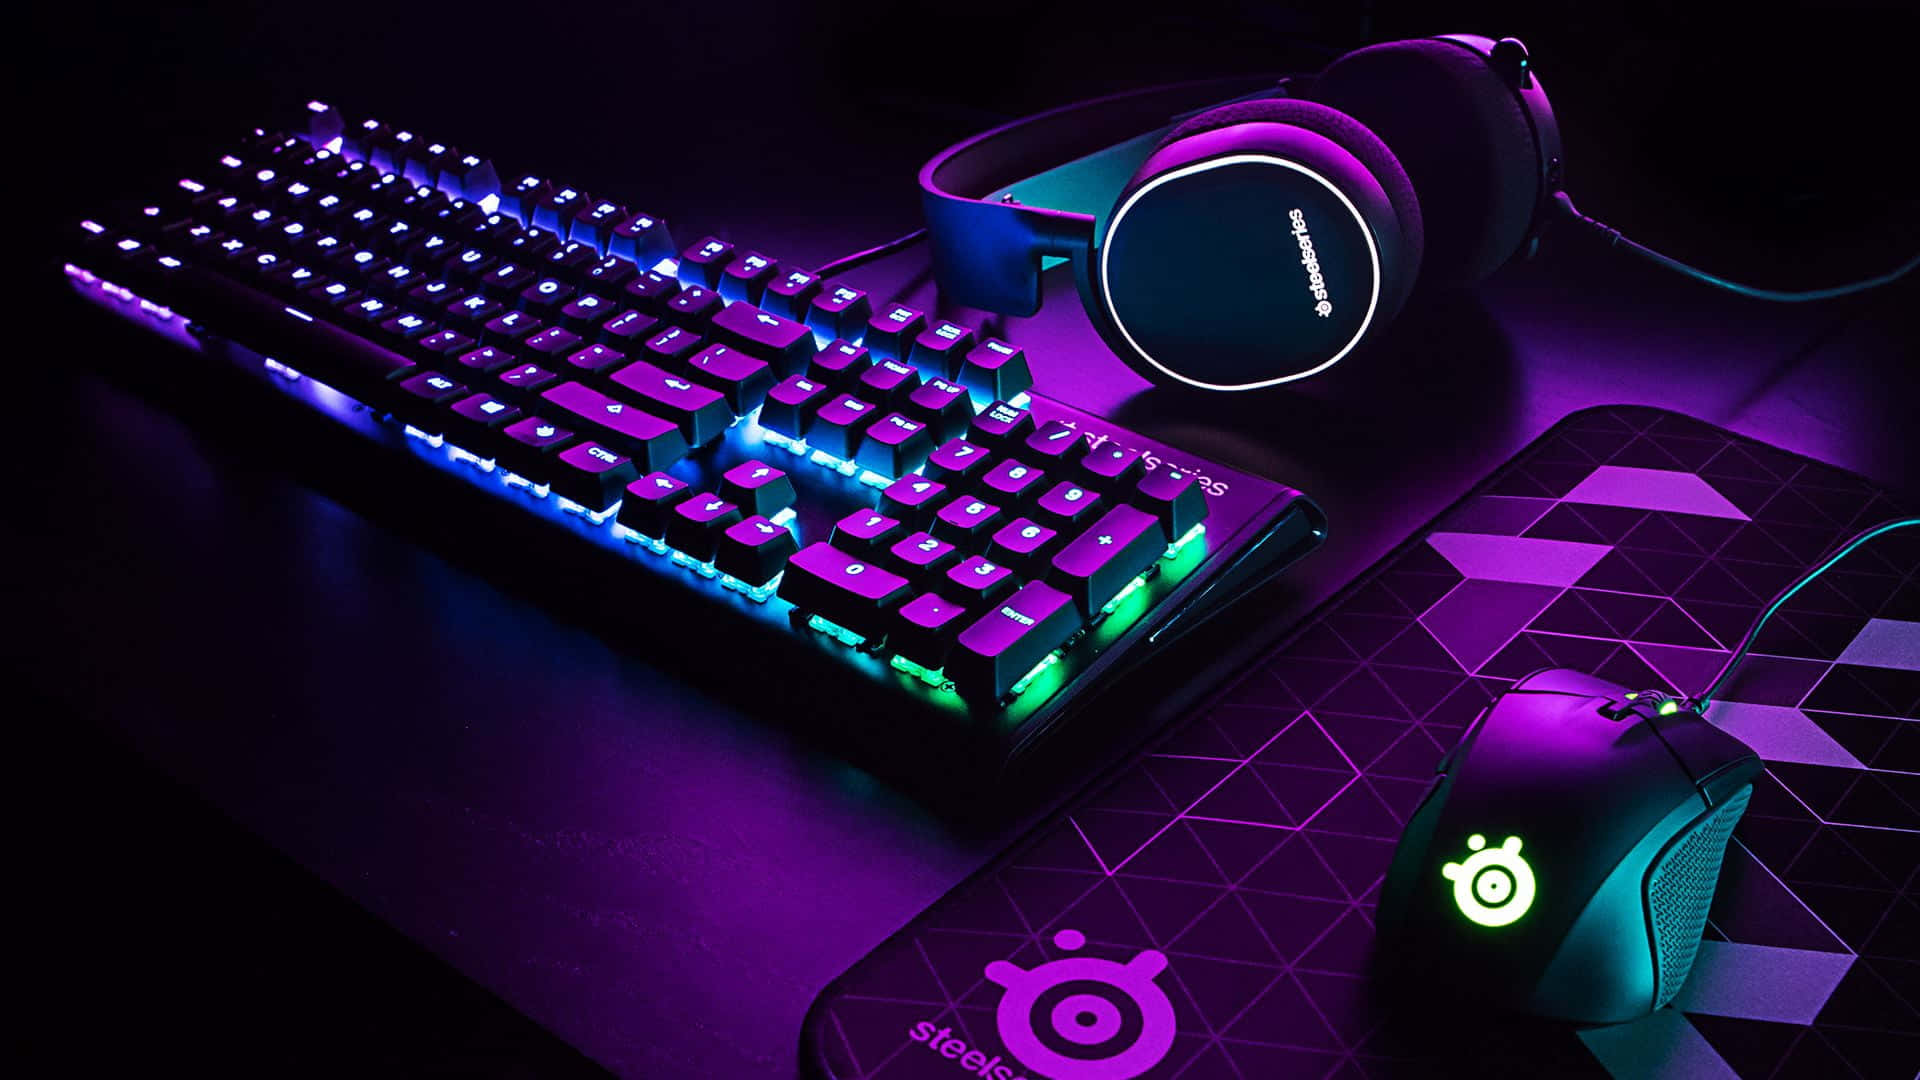 Professional Gaming Mouse Illuminated on Dark Background Wallpaper